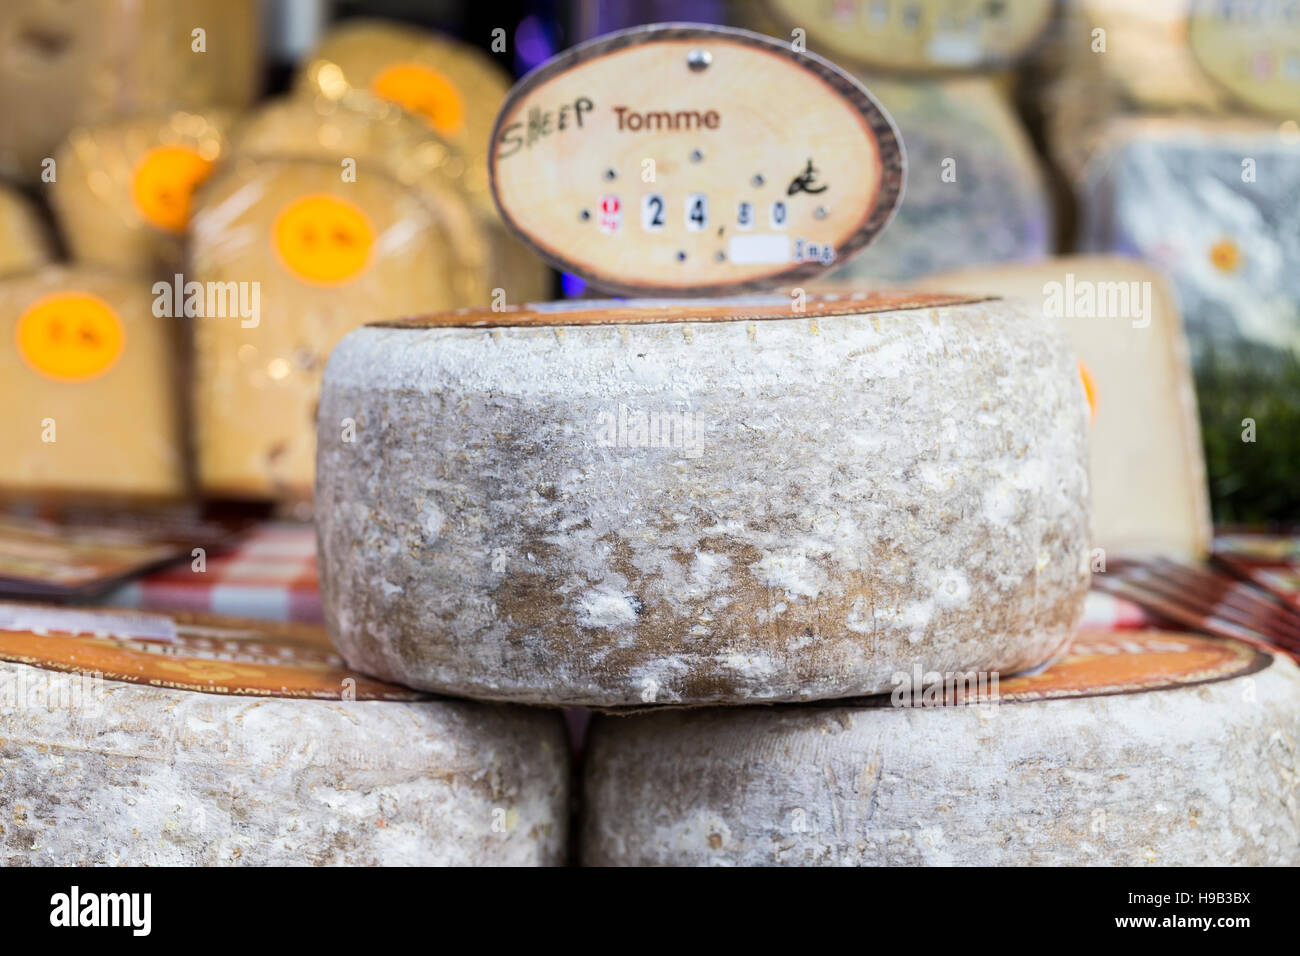 Large rounds of alpine cheese with rind, displayed at farmers market stall Stock Photo